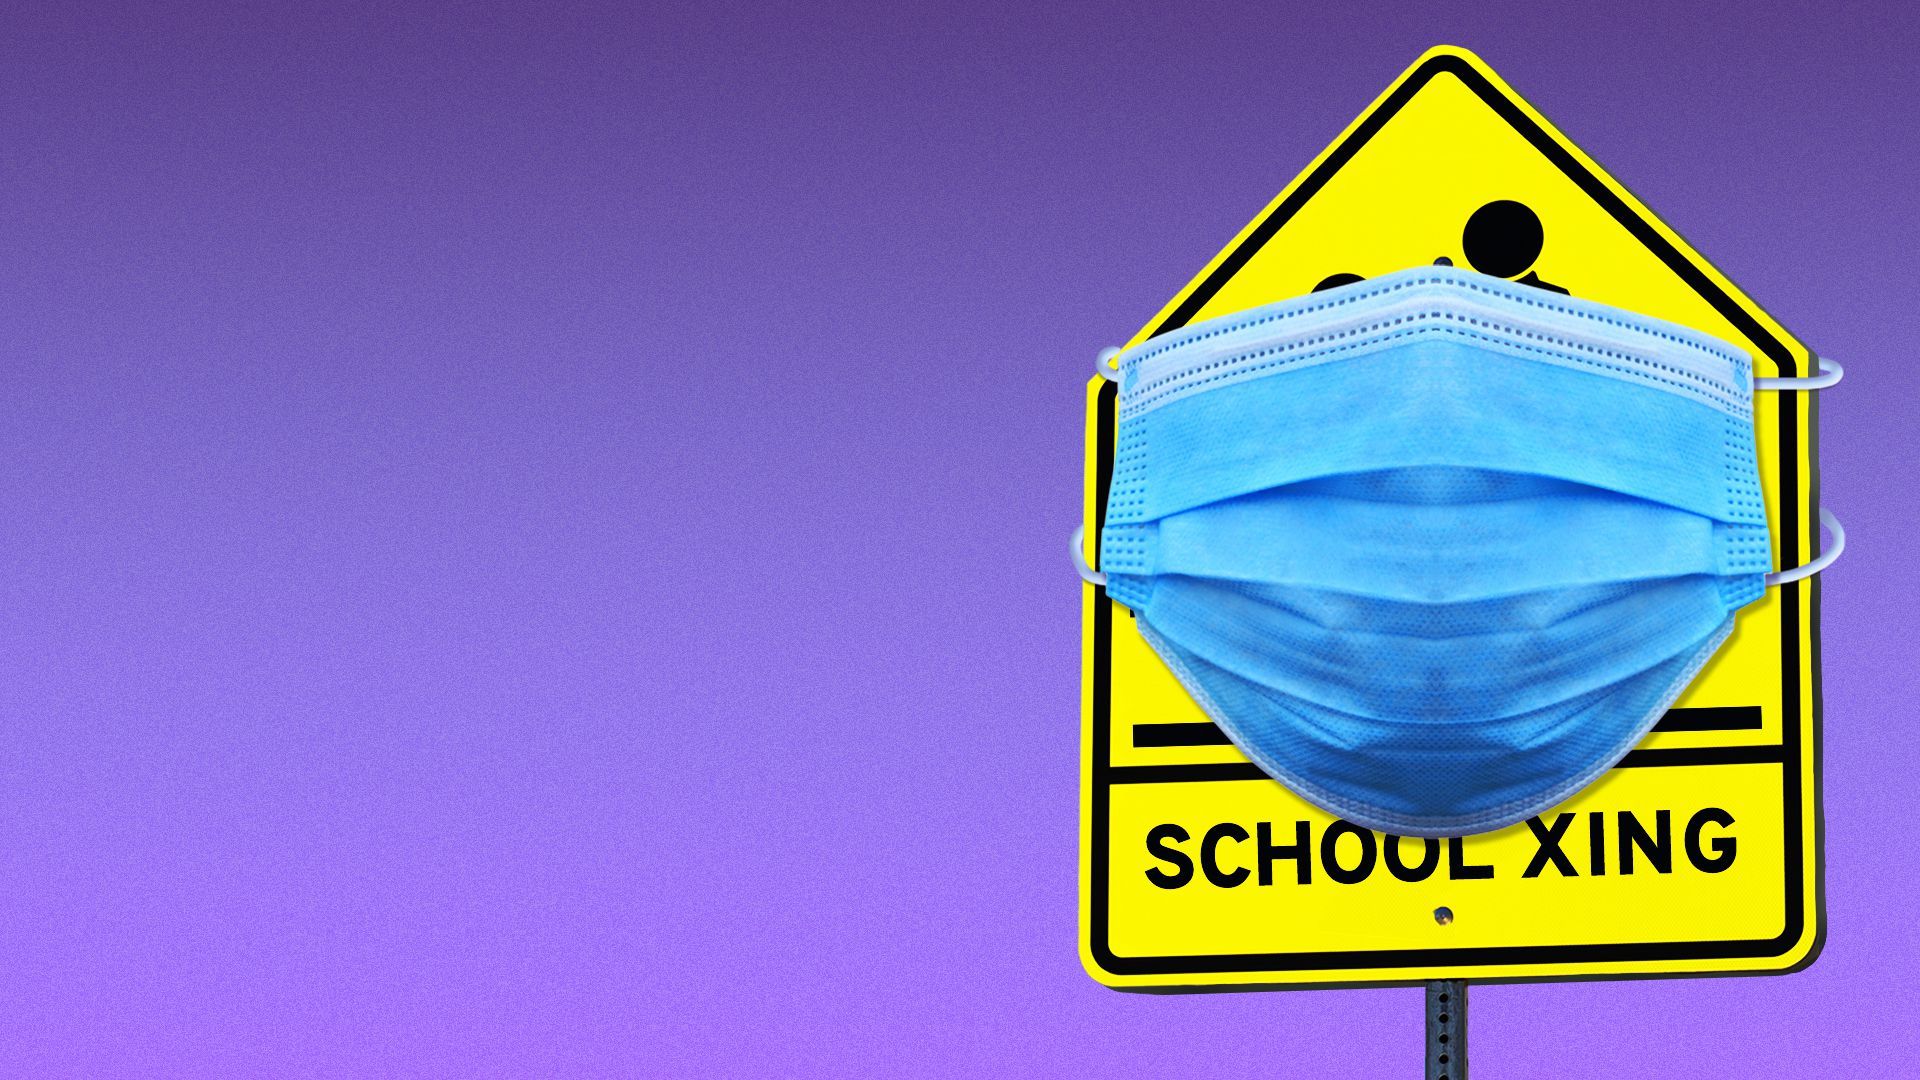 Illustration of a school crossing sign wearing a mask.